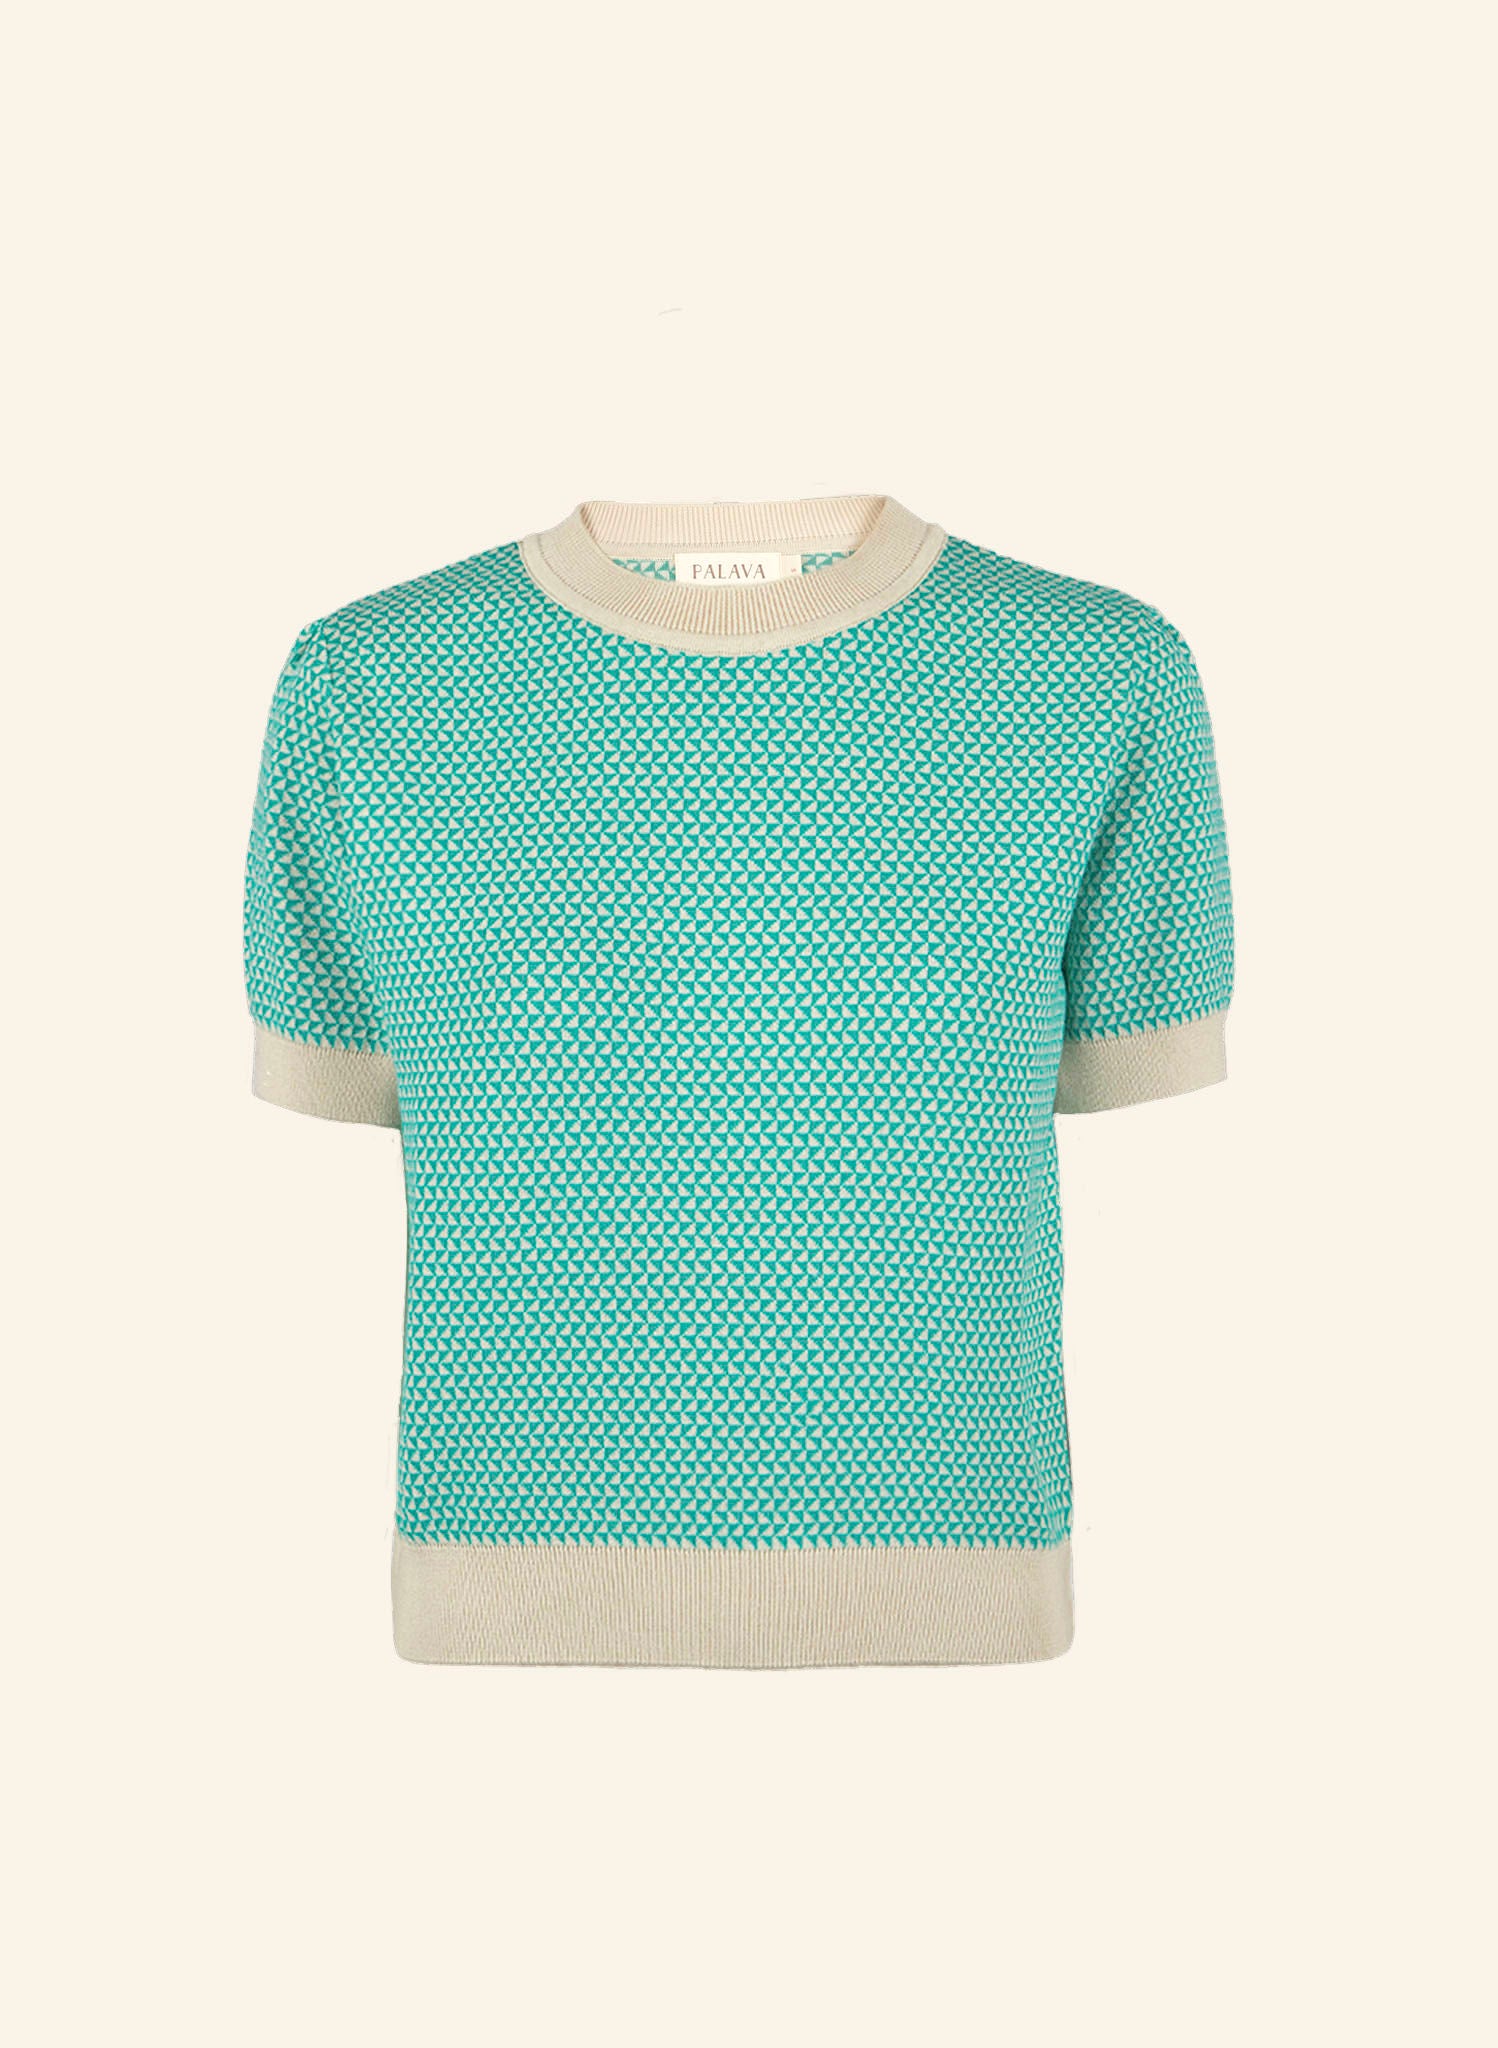 Eve - Turquoise Mexican Tiles Knitted Top